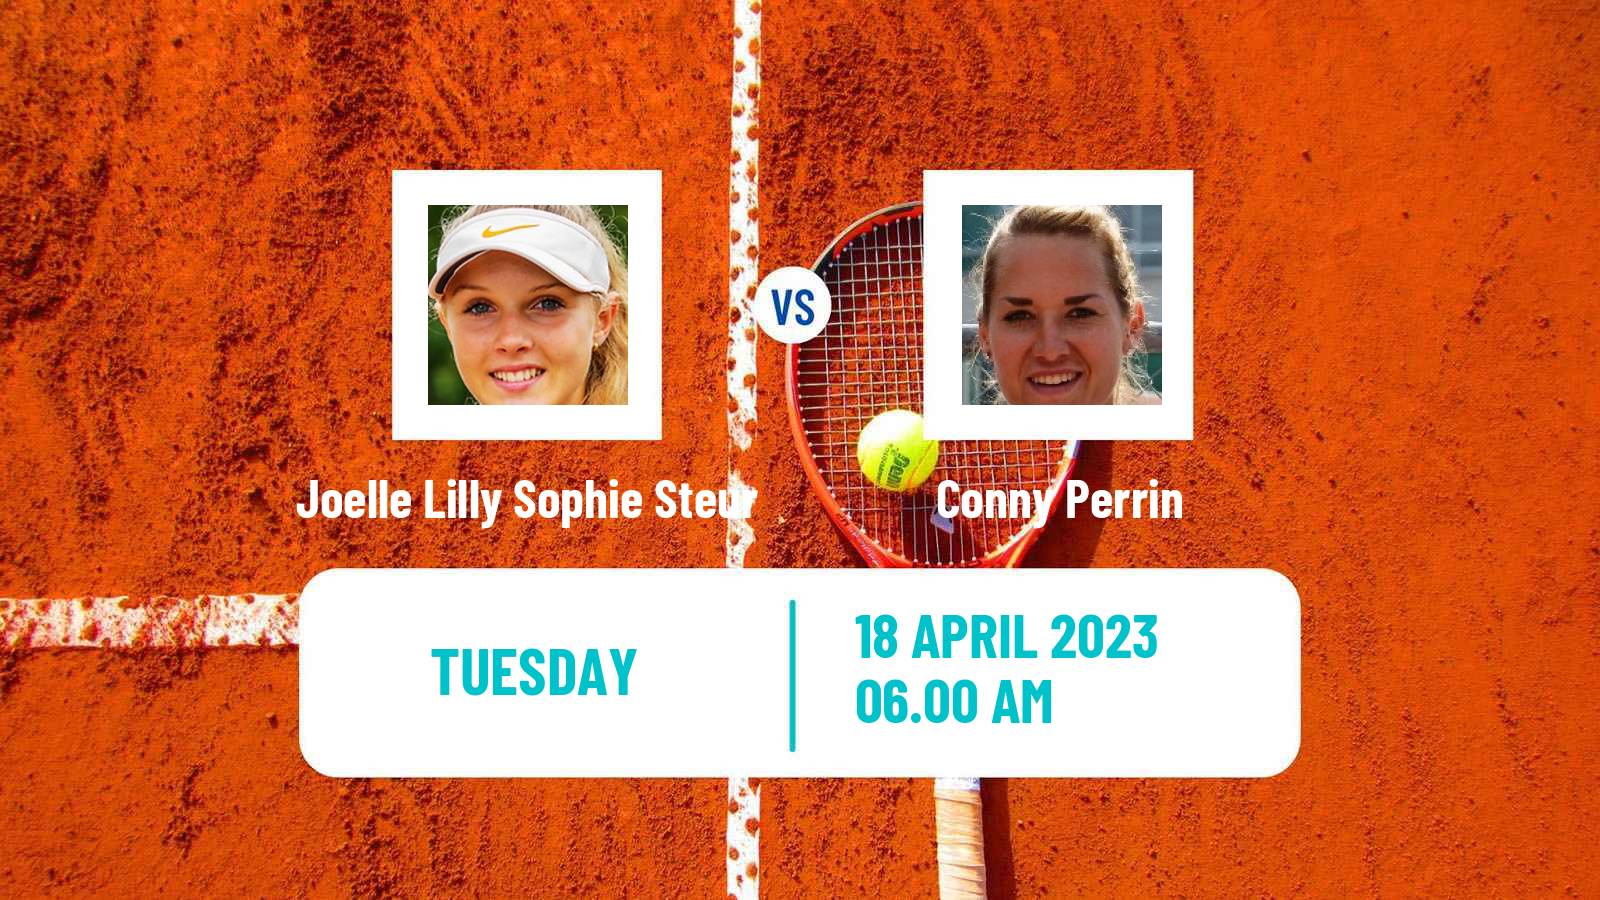 Tennis ITF Tournaments Joelle Lilly Sophie Steur - Conny Perrin